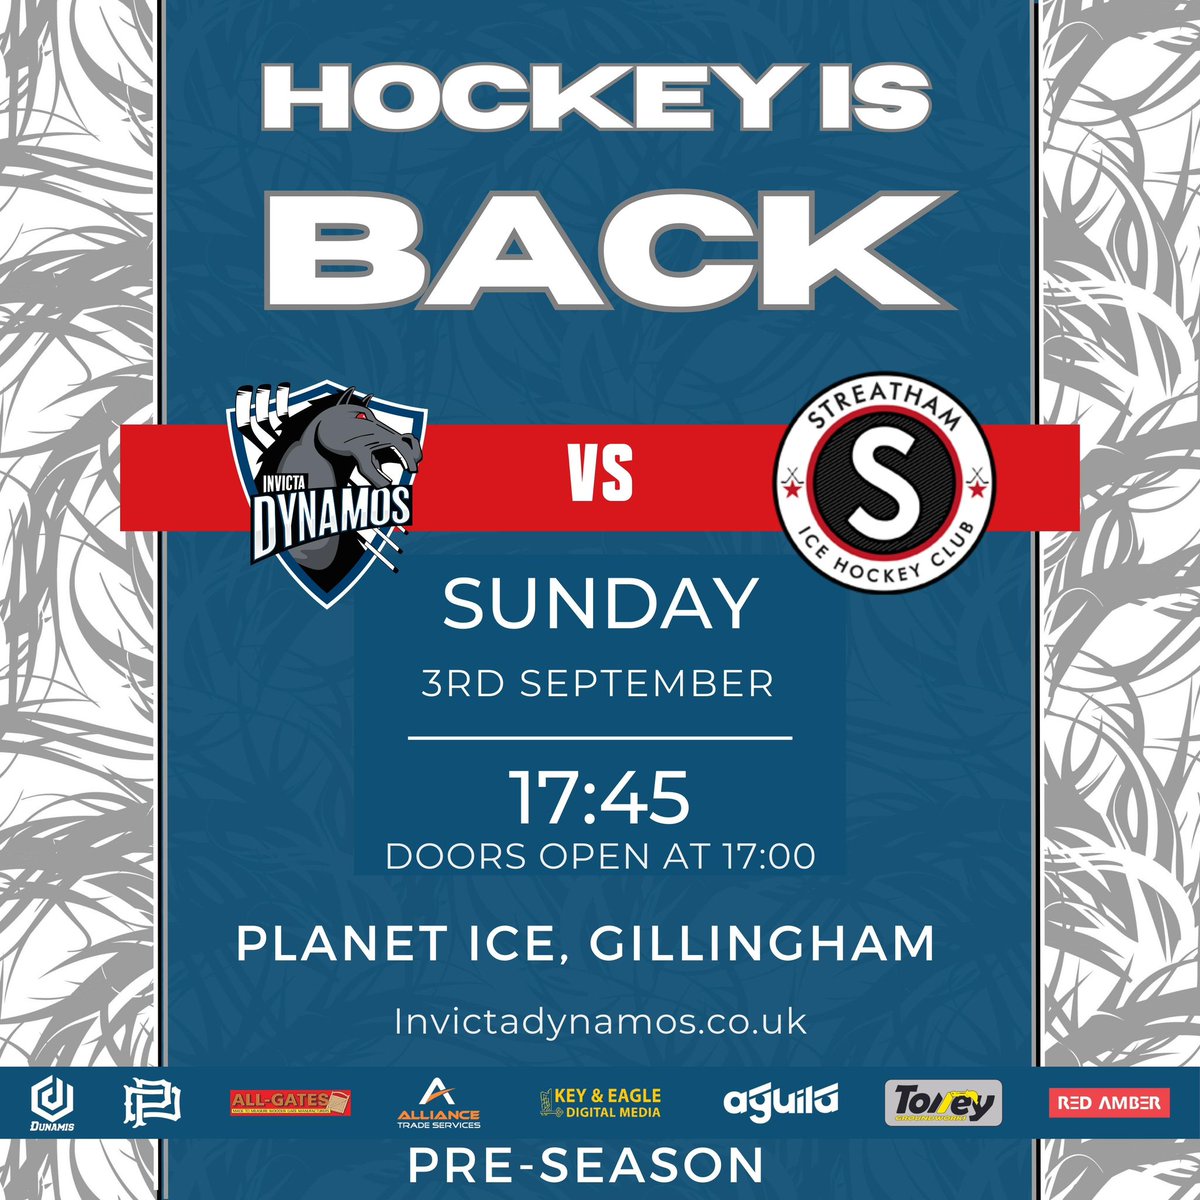 HERE WE GO! HOCKEY IS BACK! After a long summer our new look team will take to the ice for the first time of the 2023/24 season! Got hockey withdrawals?? You've not got much longer to wait! Join us to RAISE THE ROOF! Let’s make it a big one! Details below 👇